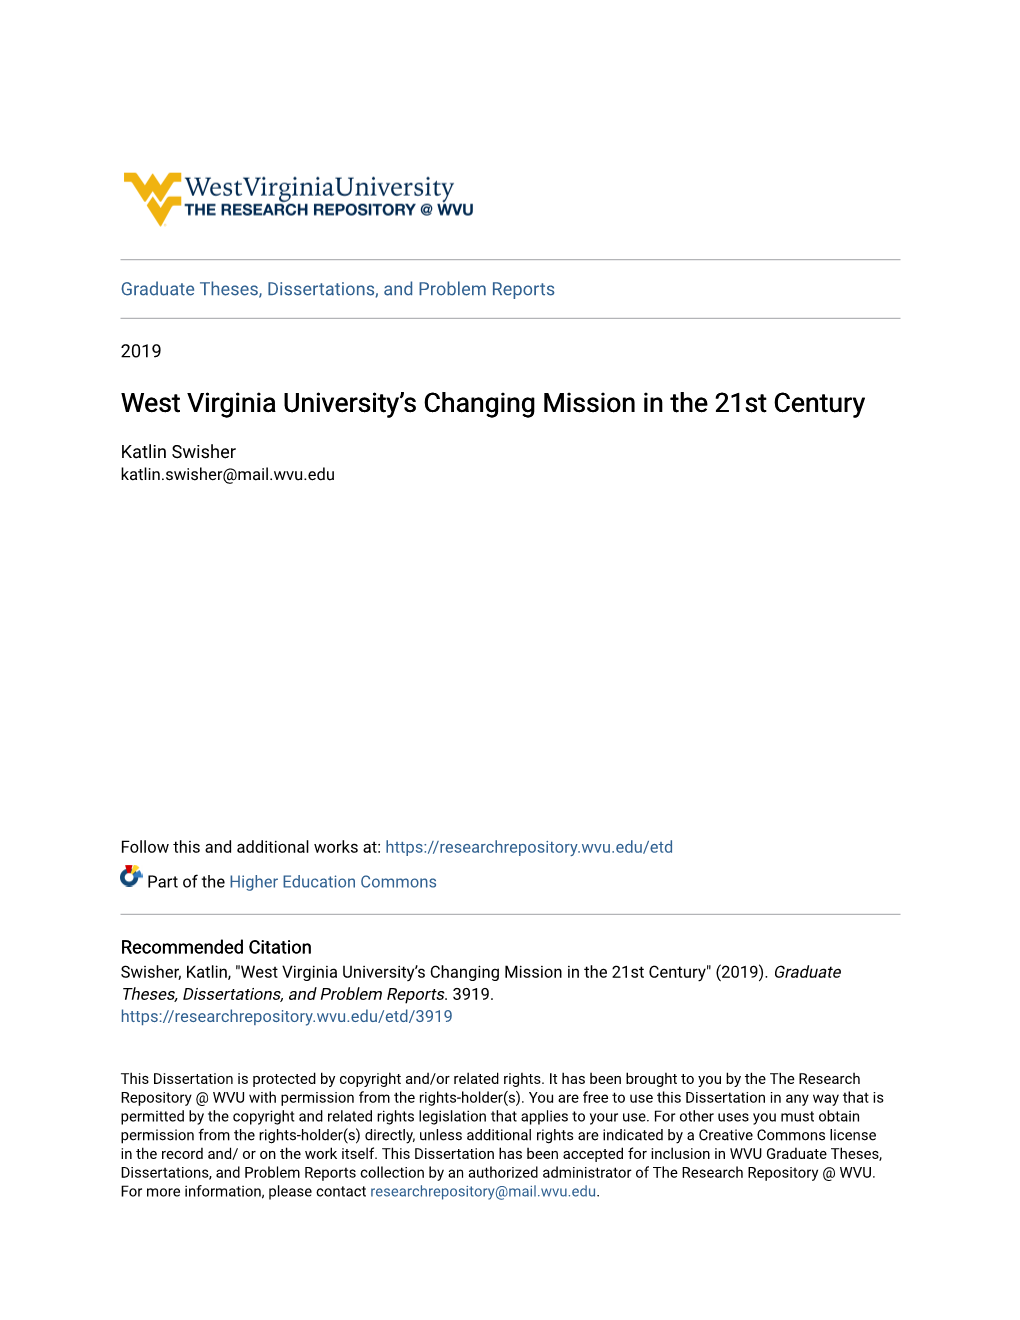 West Virginia University's Changing Mission in the 21St Century